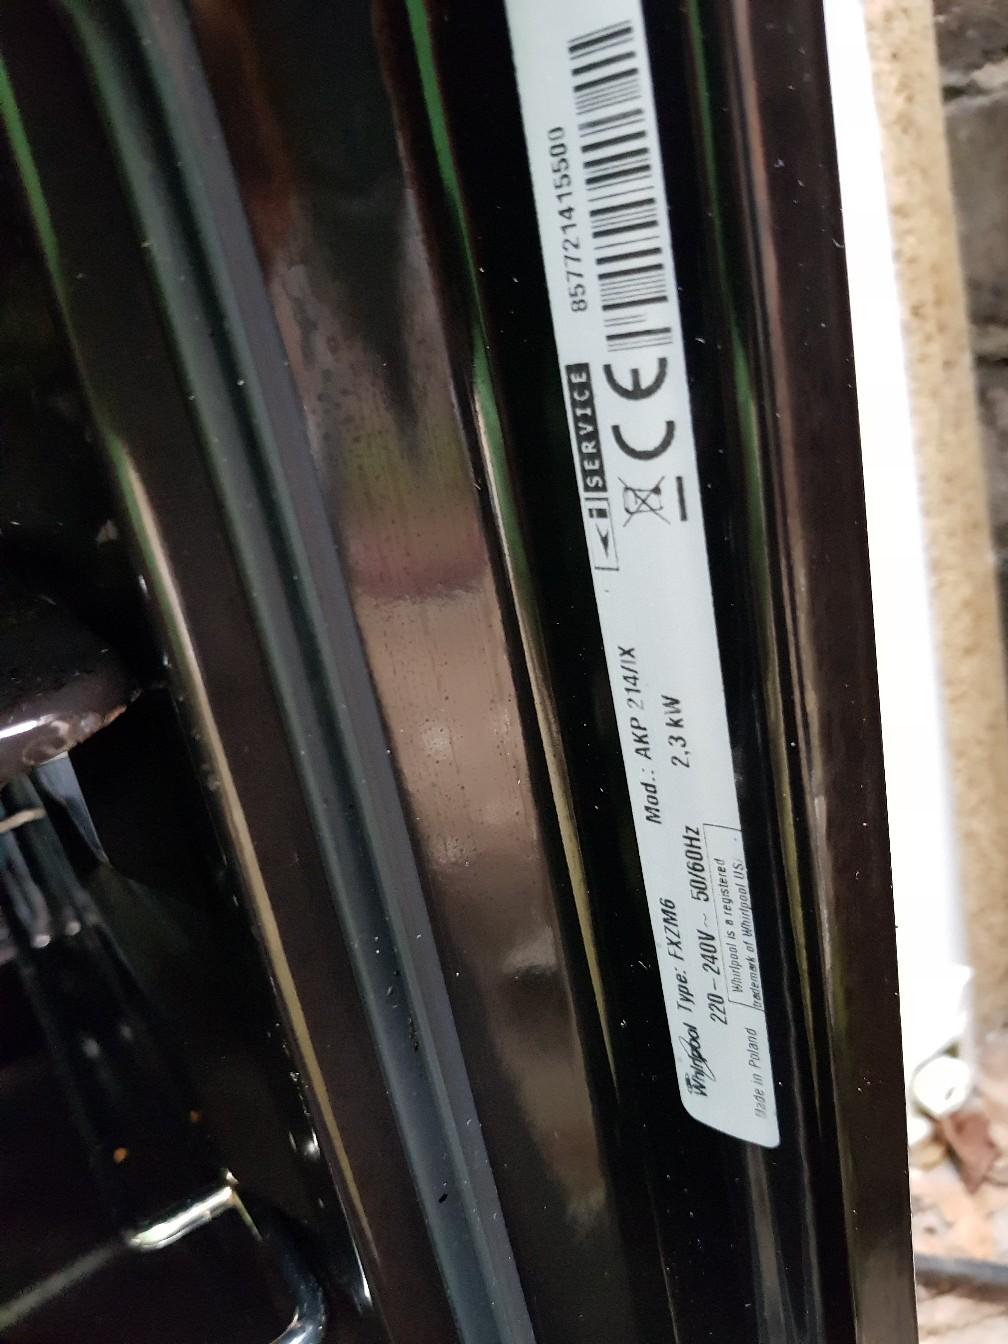 Hub trui snap Whirlpool built in oven FXZM6 AKP214 in L23 Sefton for £50.00 for sale |  Shpock